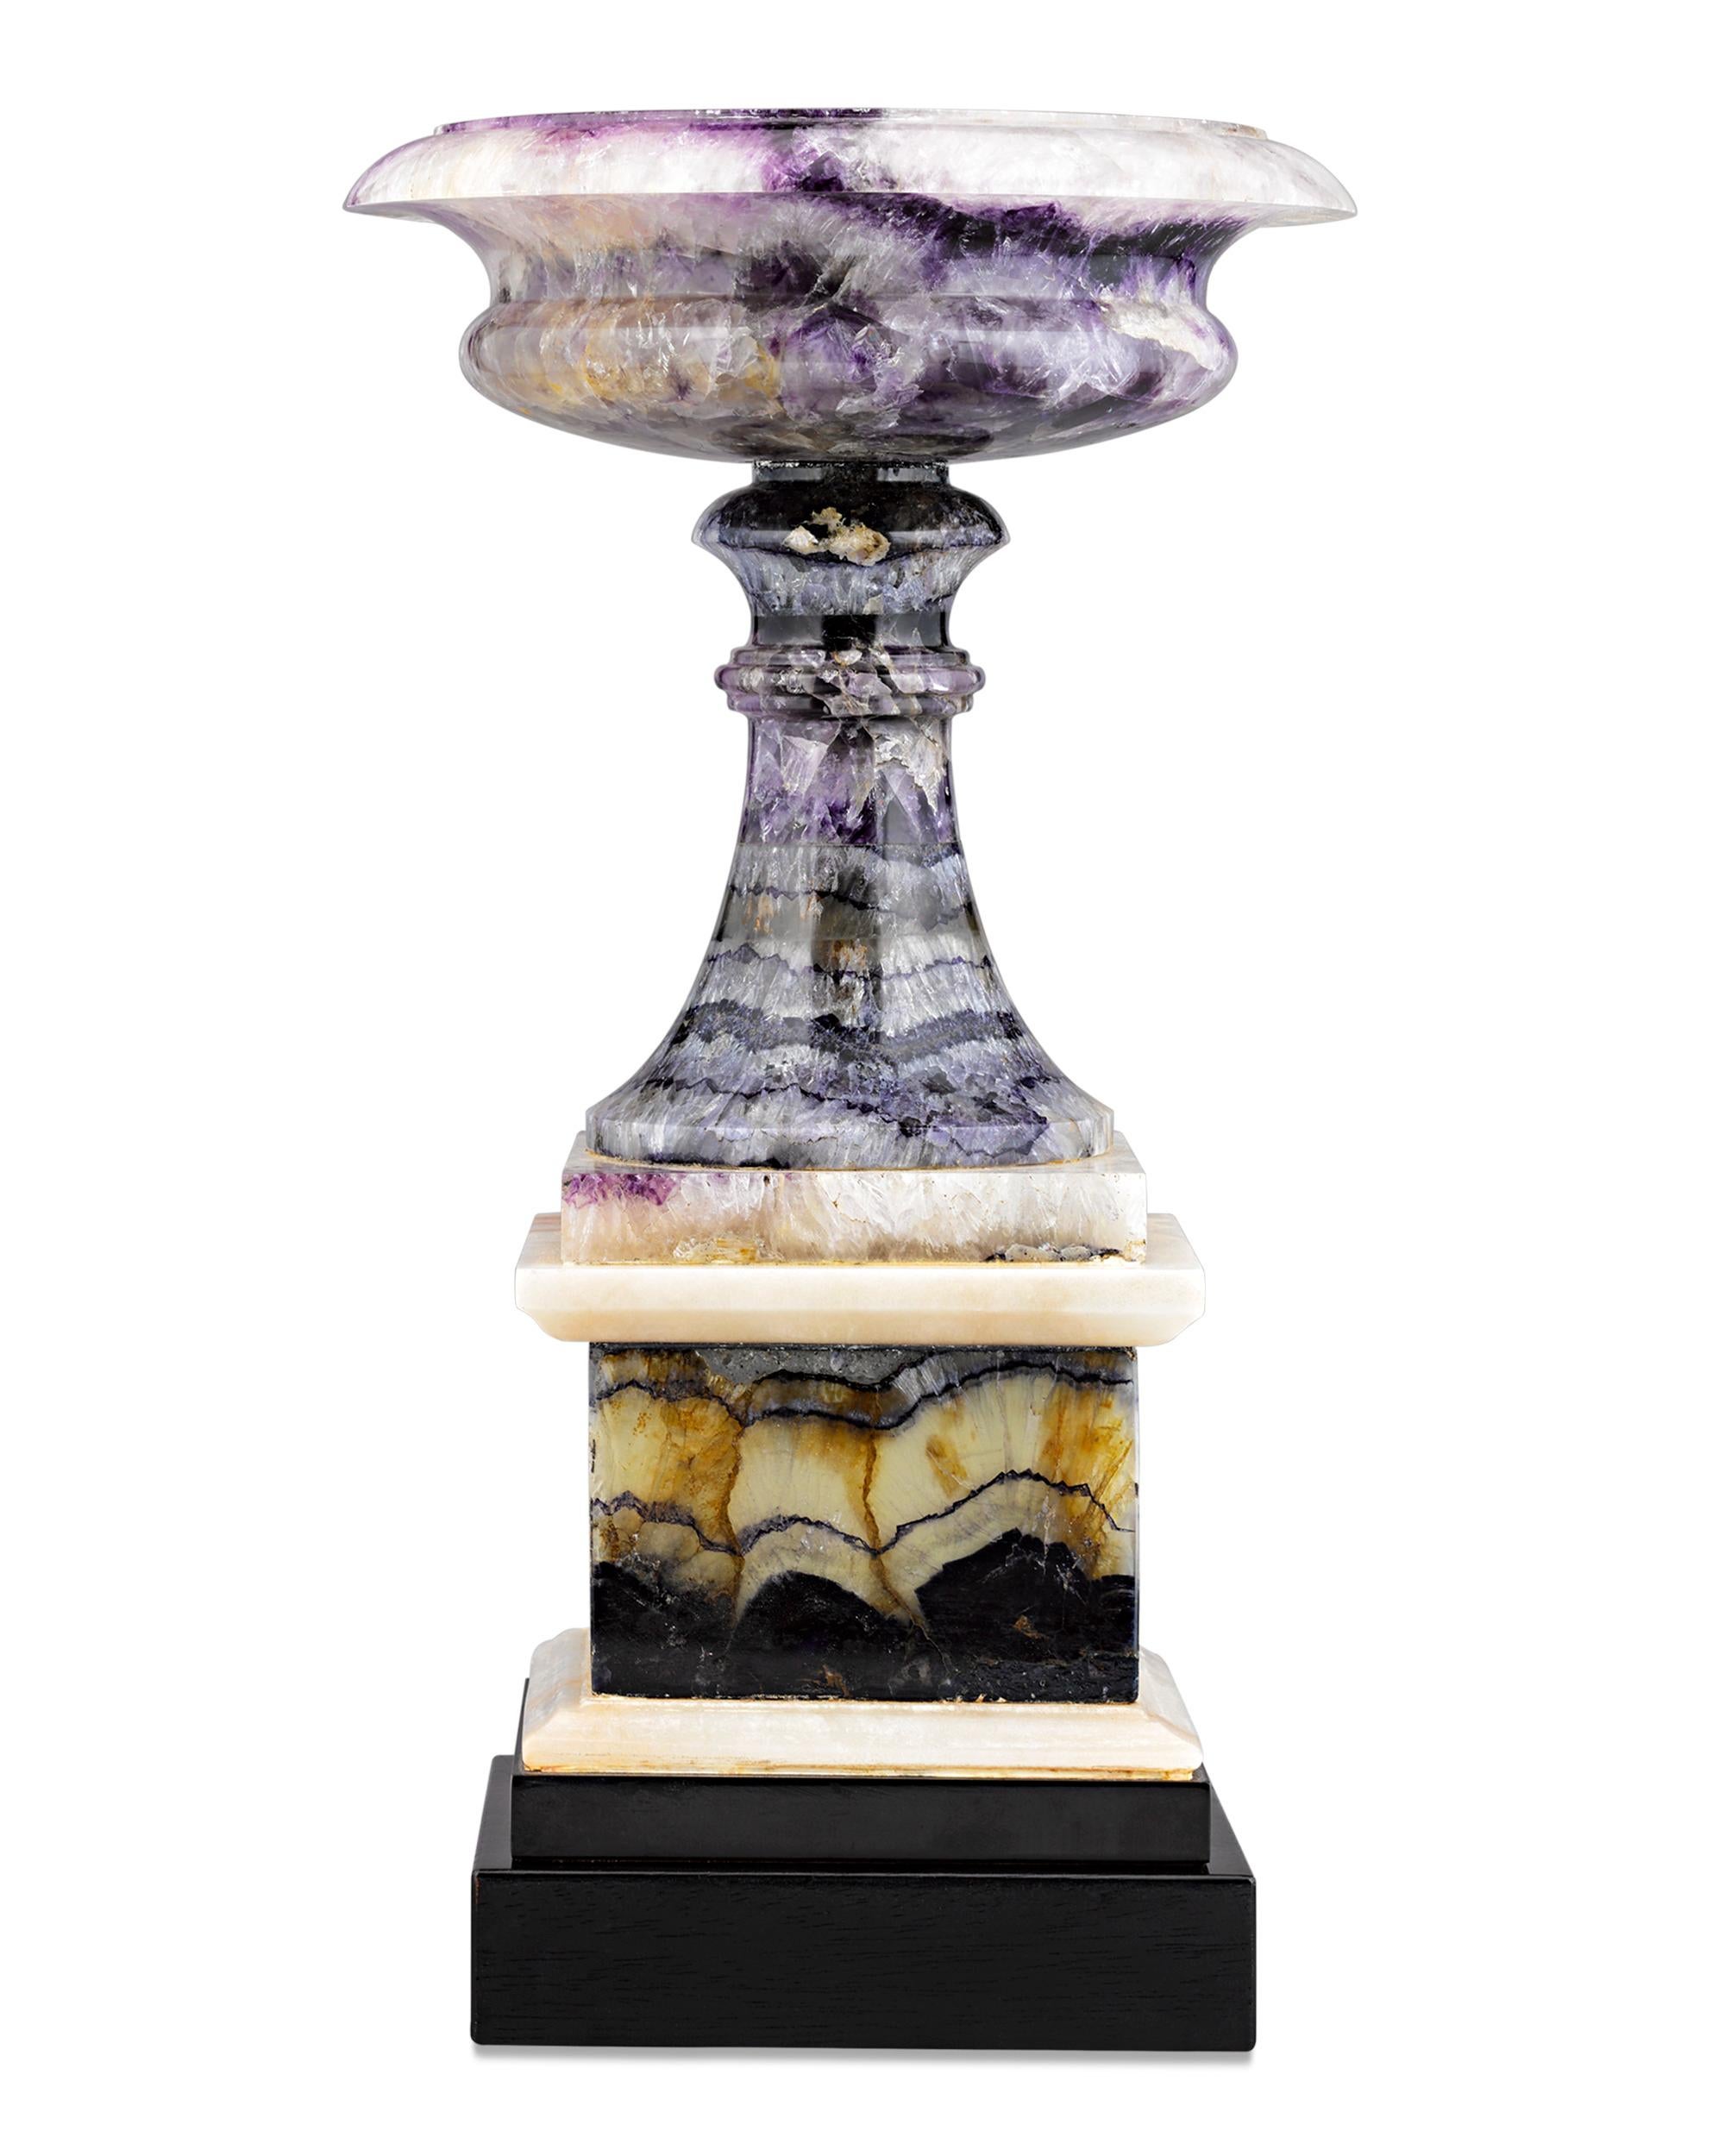 This highly important George IV tazza is crafted from a stunning example of Derbyshire Blue John, one of the rarest and most coveted minerals in the world. The hardstone is highly prized thanks to its natural patterns and striations, as well as its